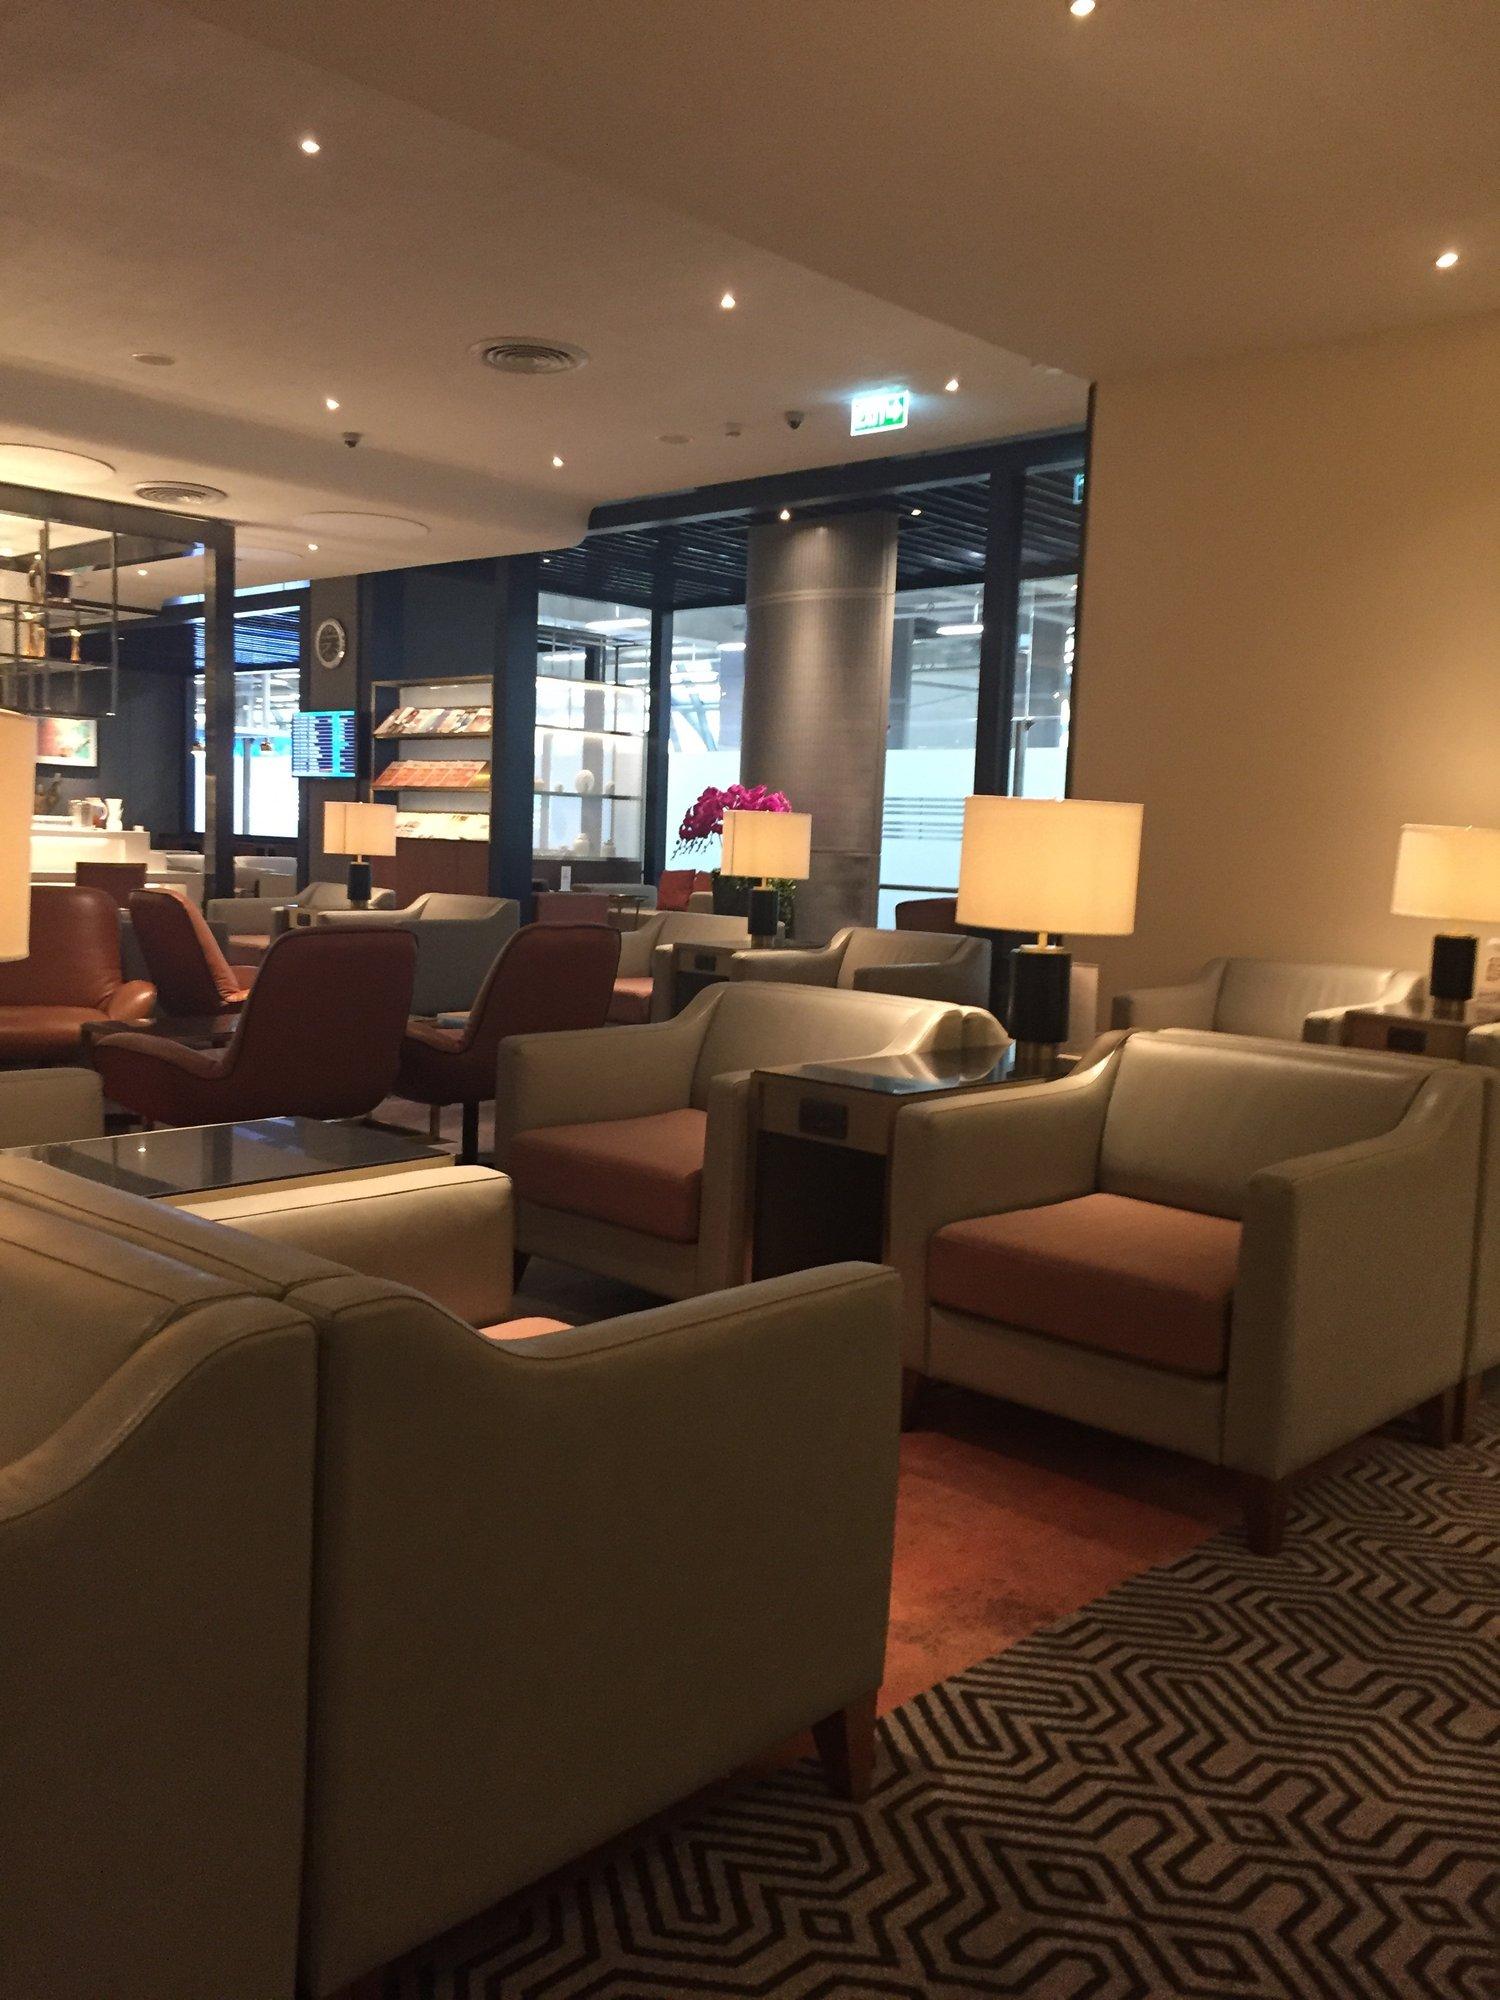 Singapore Airlines SilverKris Business Class Lounge image 5 of 16